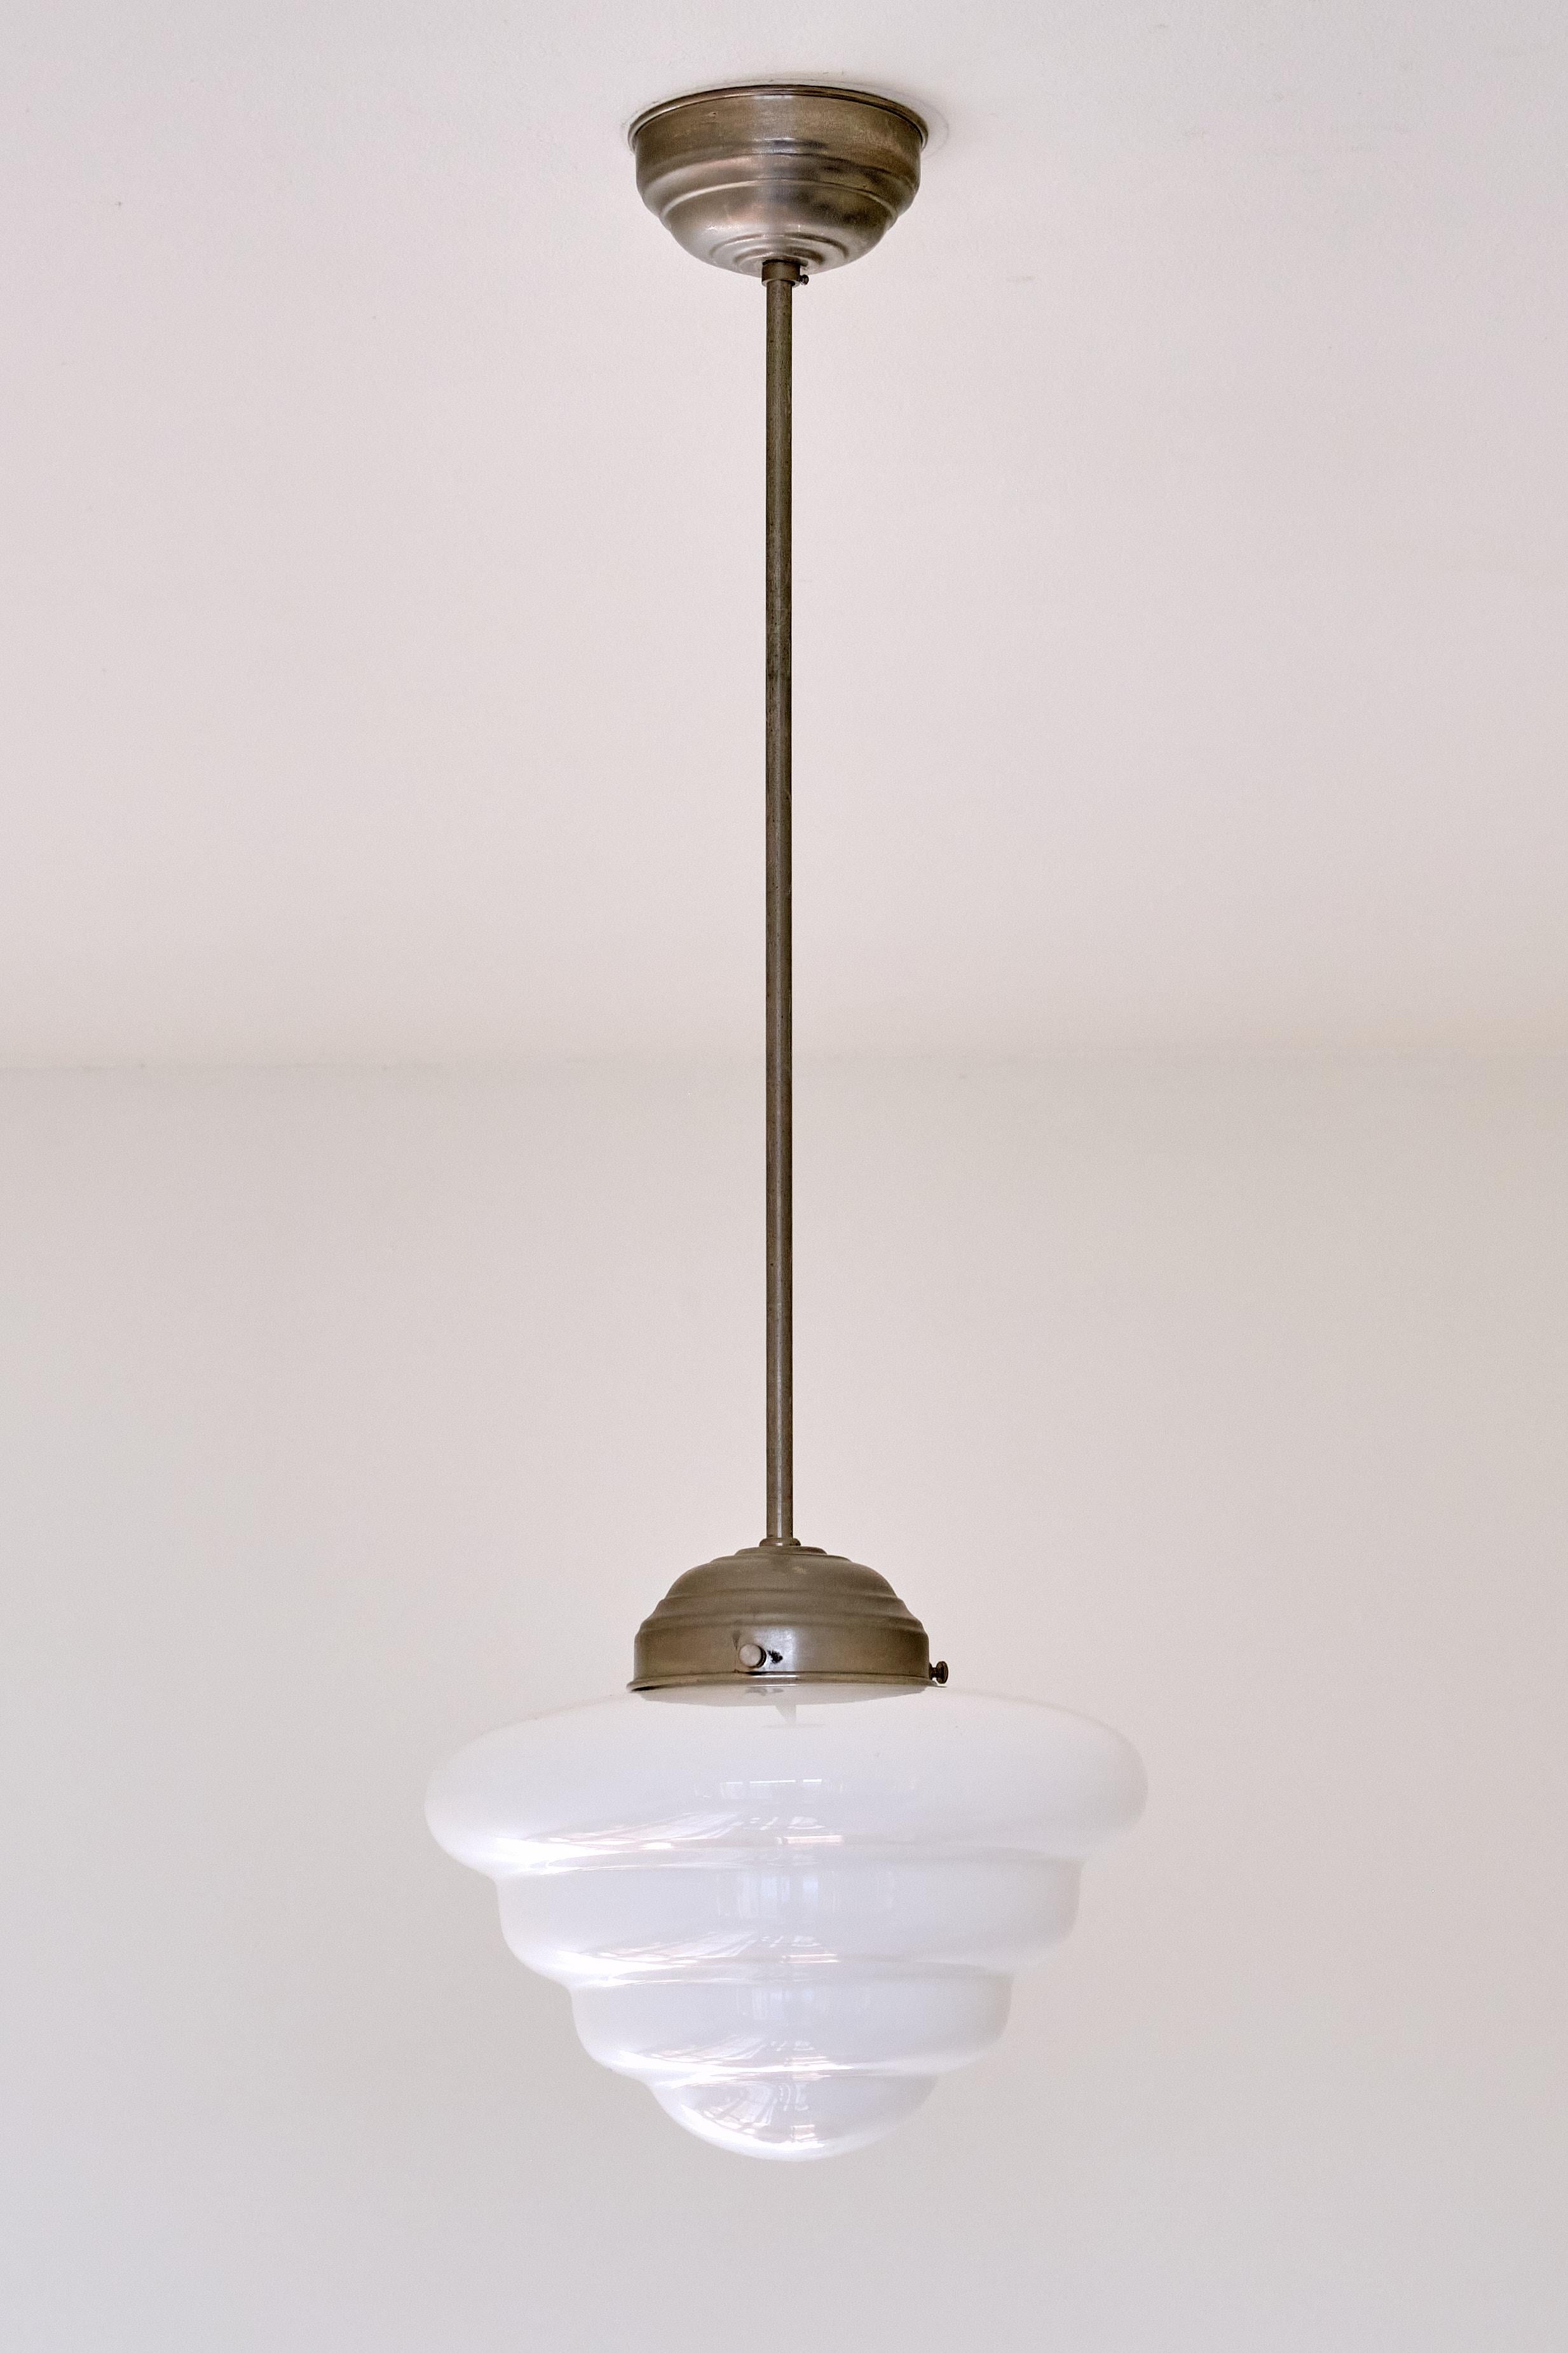 Mid-20th Century Gispen 'Michelin' Tiered Pendant Light with Opal Glass Shade, Netherlands, 1930s